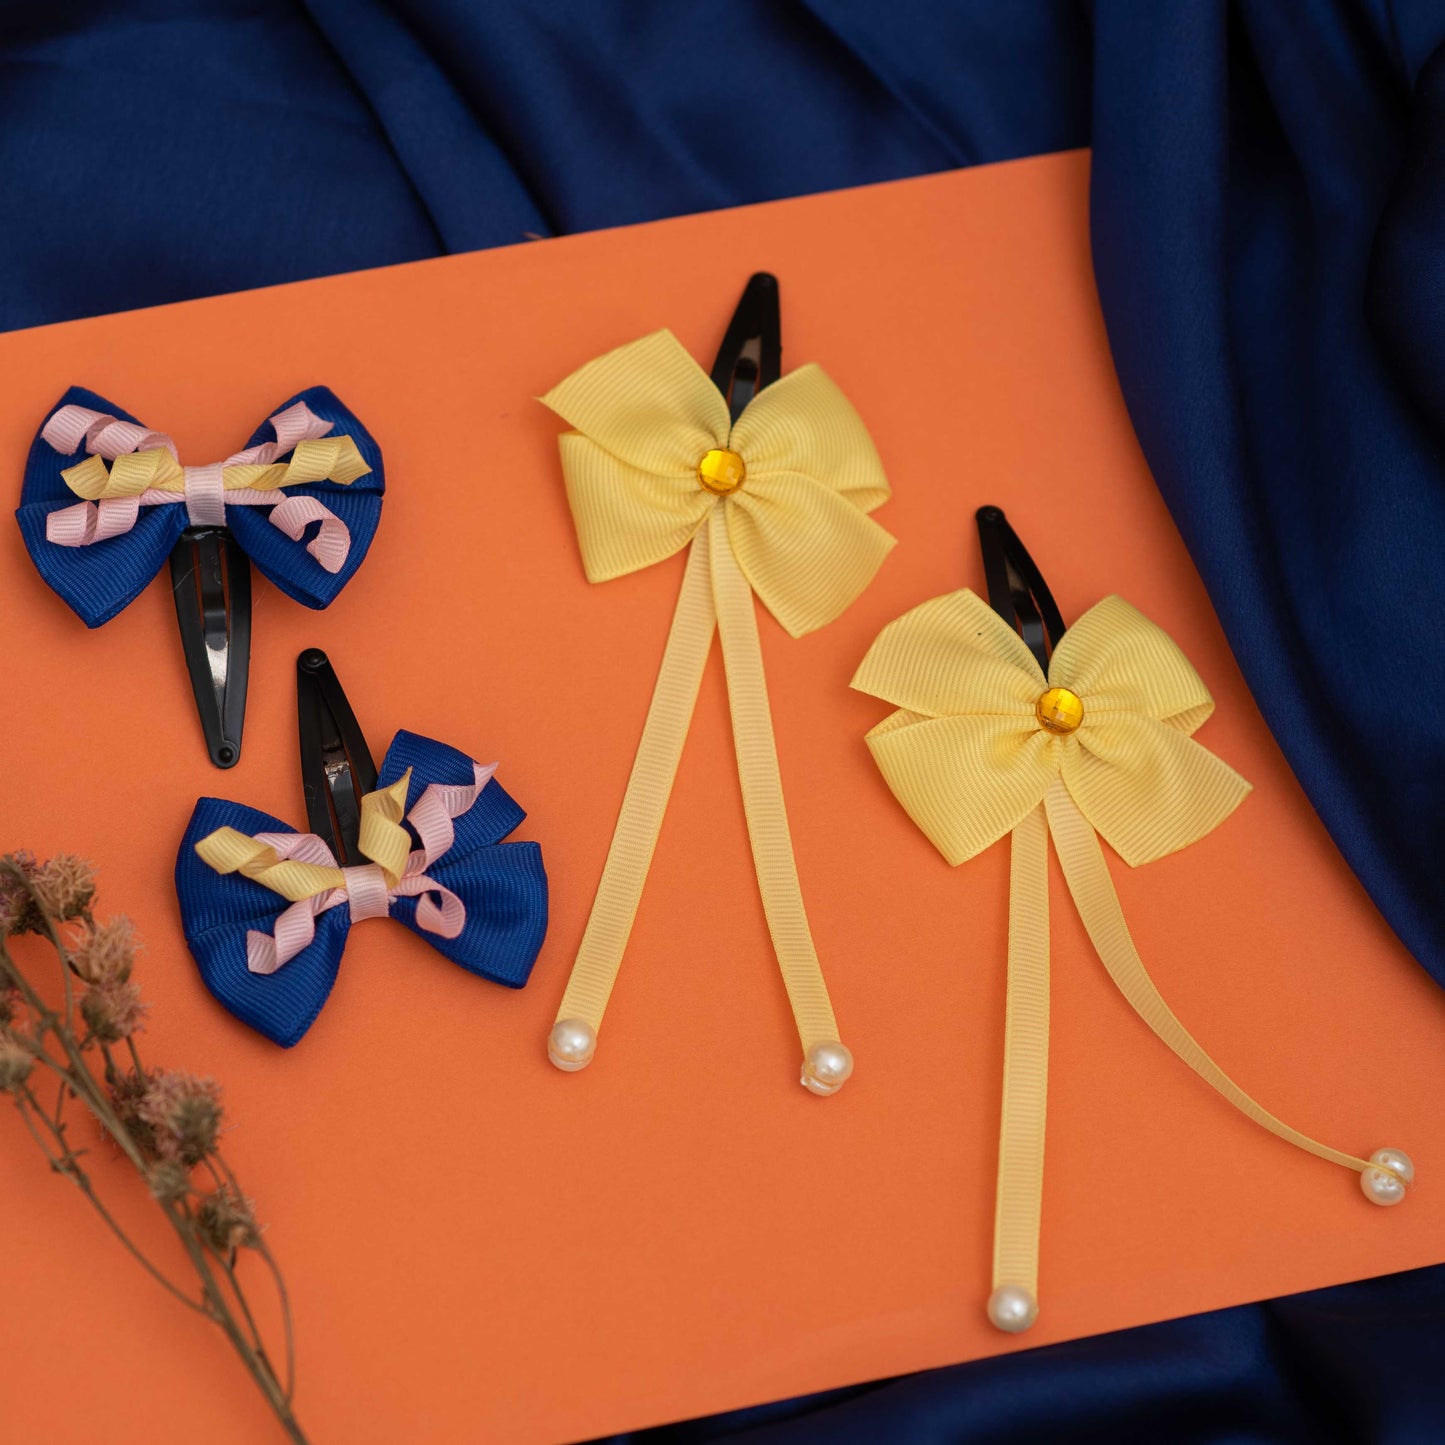 Combo: Set of 2 tic-tac combo,one of elegant danglers with pearls embellished and second one adorable bow with curly on tic-tac pins -  Yellow and Blue (Set of 2 pairs - 4 quantity)